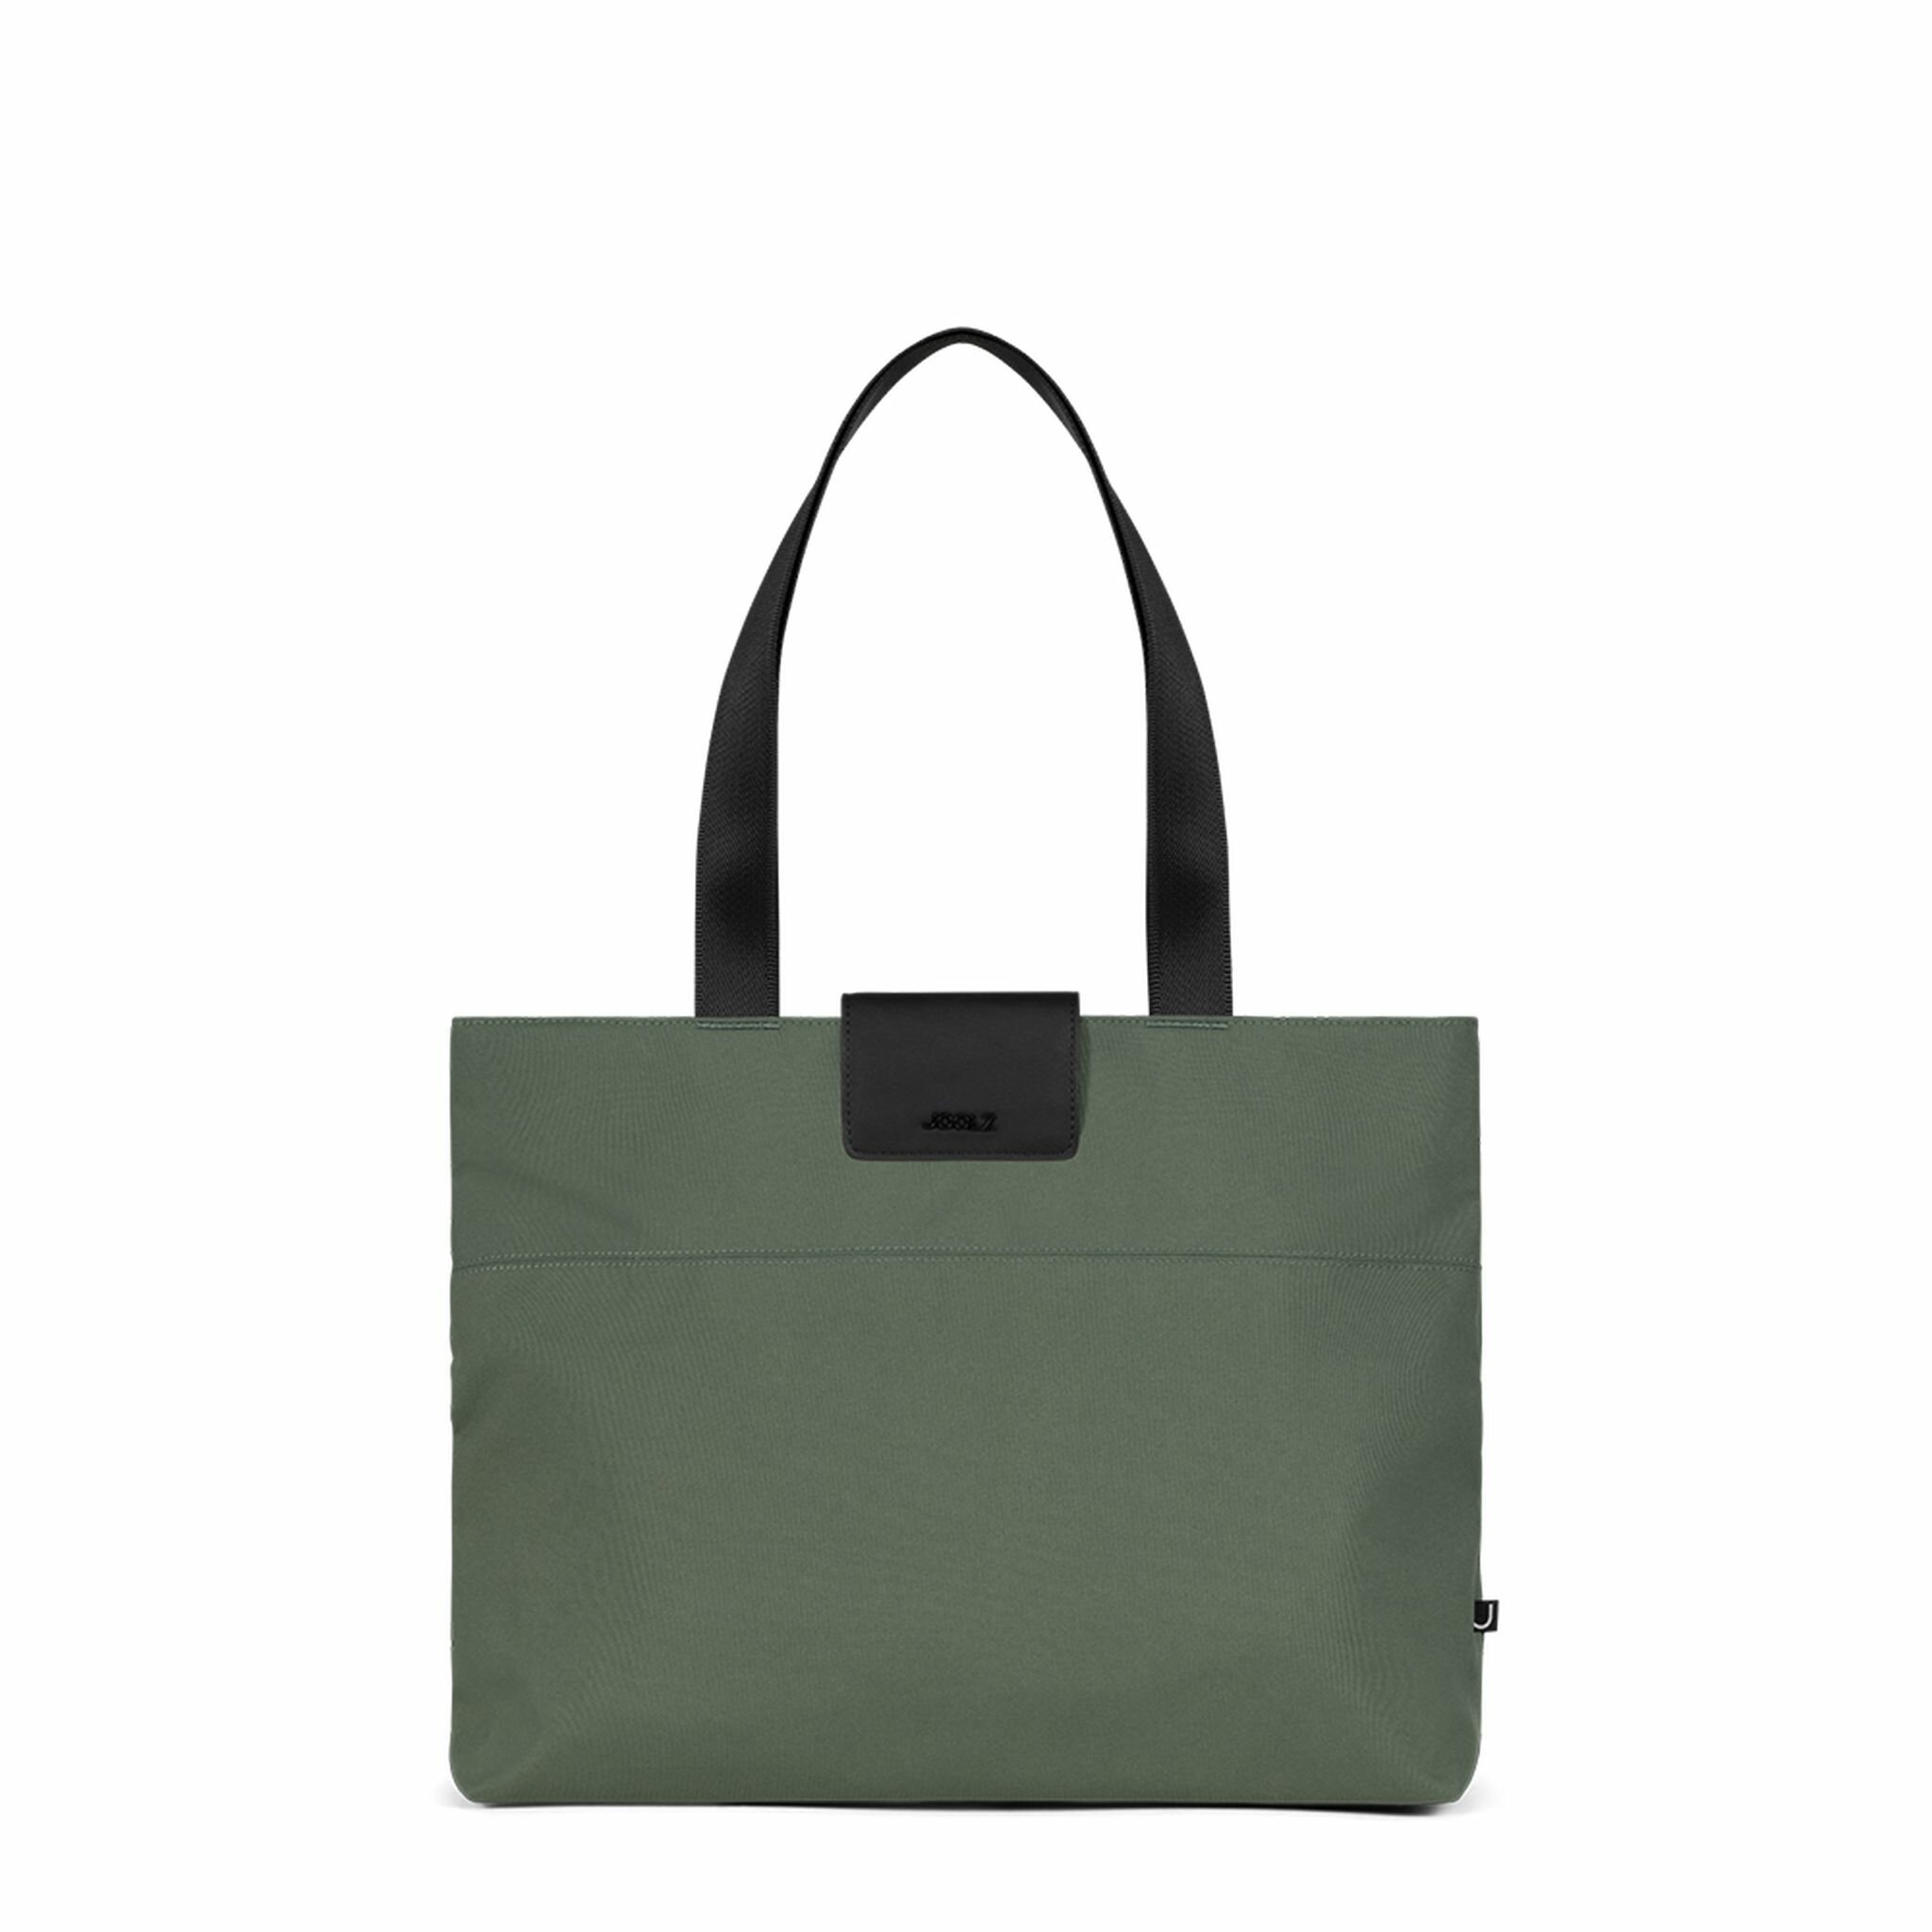 Сумка Joolz changing bag selected forest green